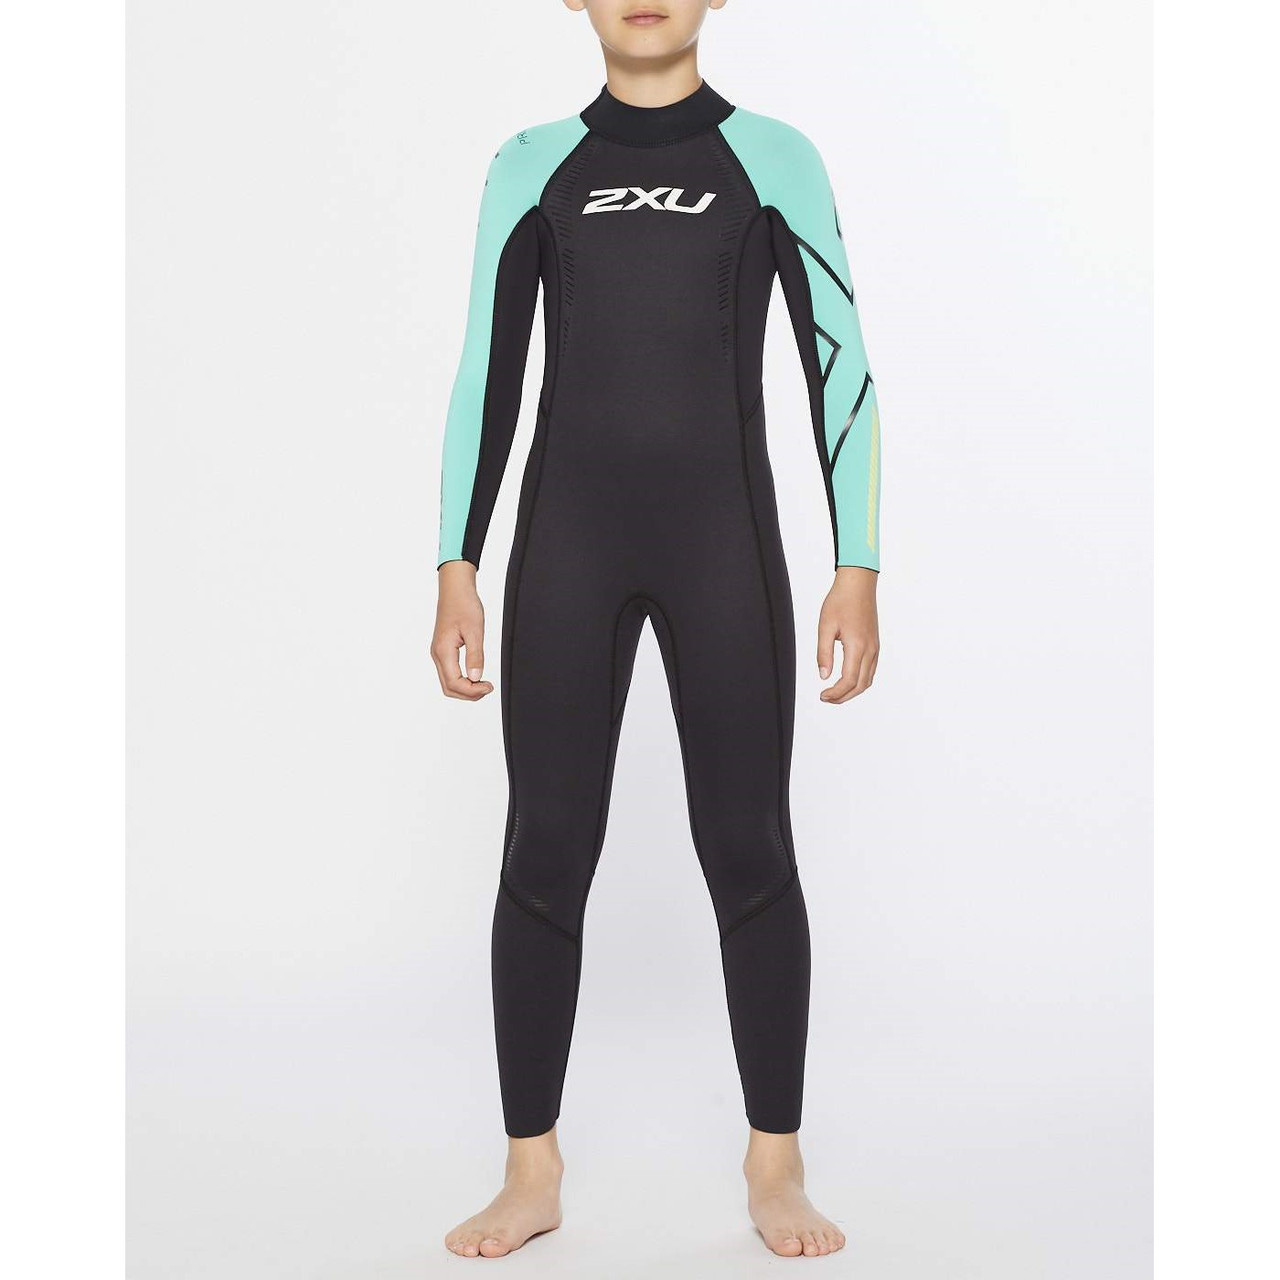 Andre steder pegefinger Forføre 2XU Youth Propel Wetsuit